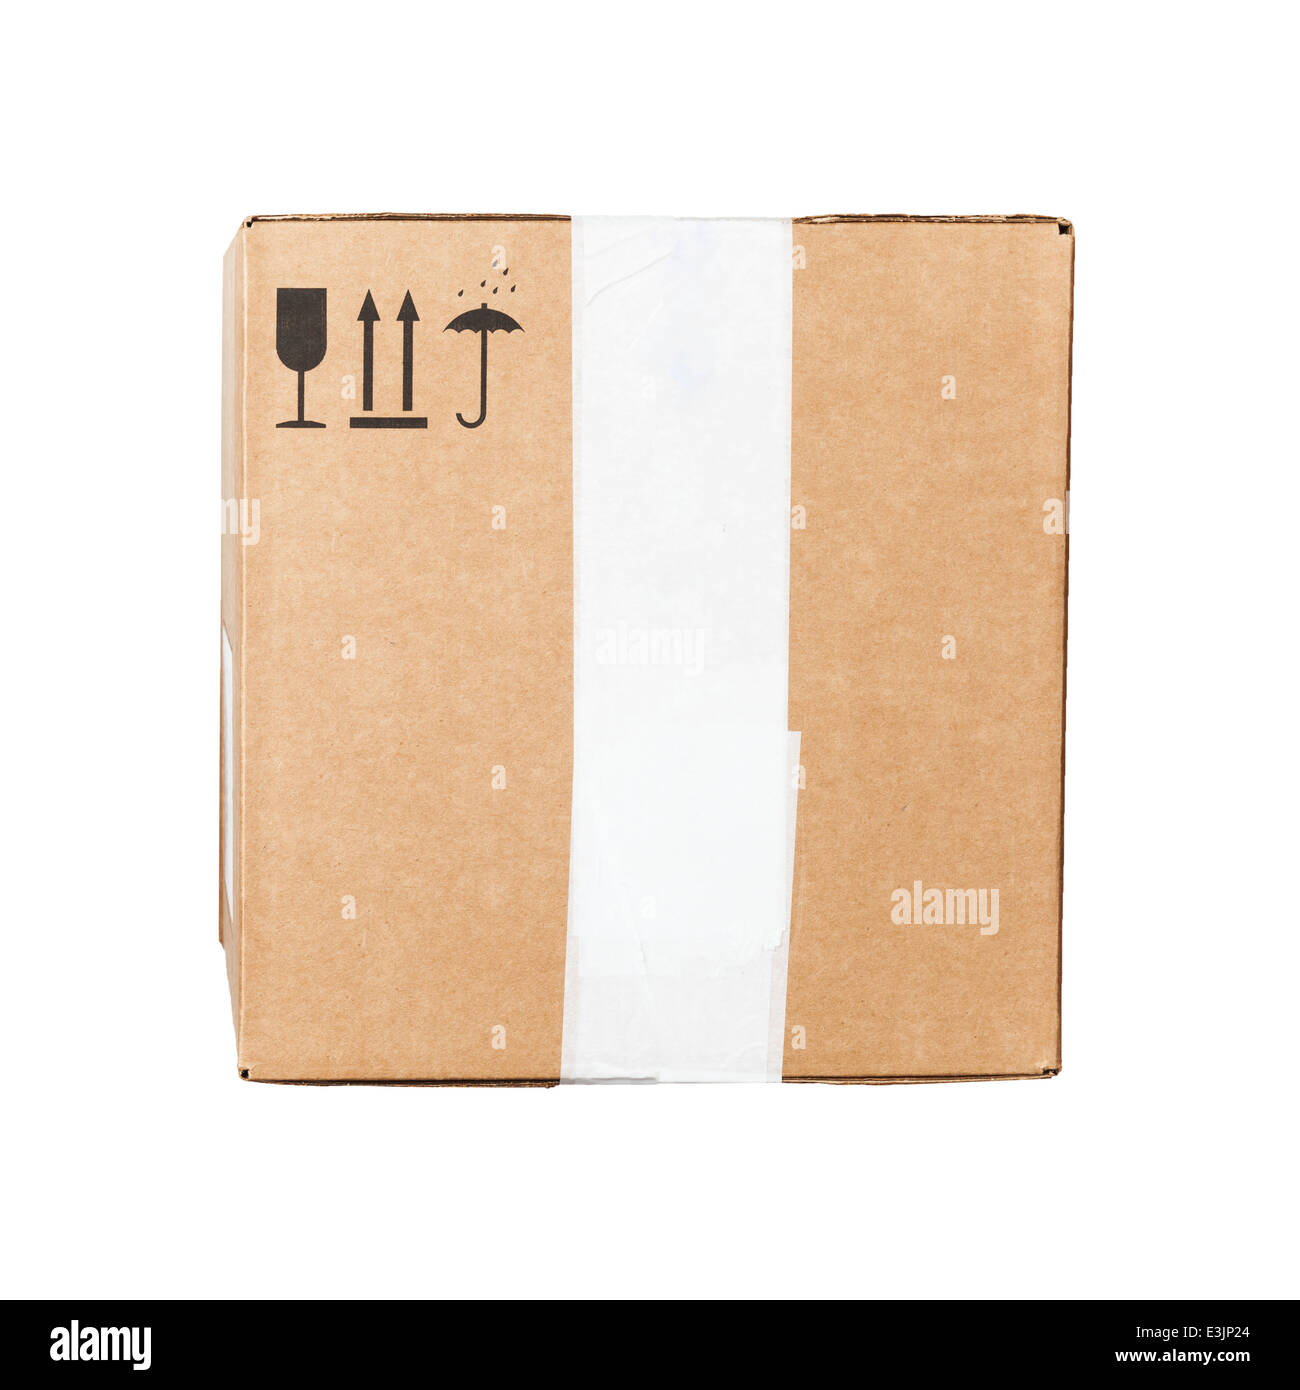 Cardboard box with black signs isolated on white background Stock Photo